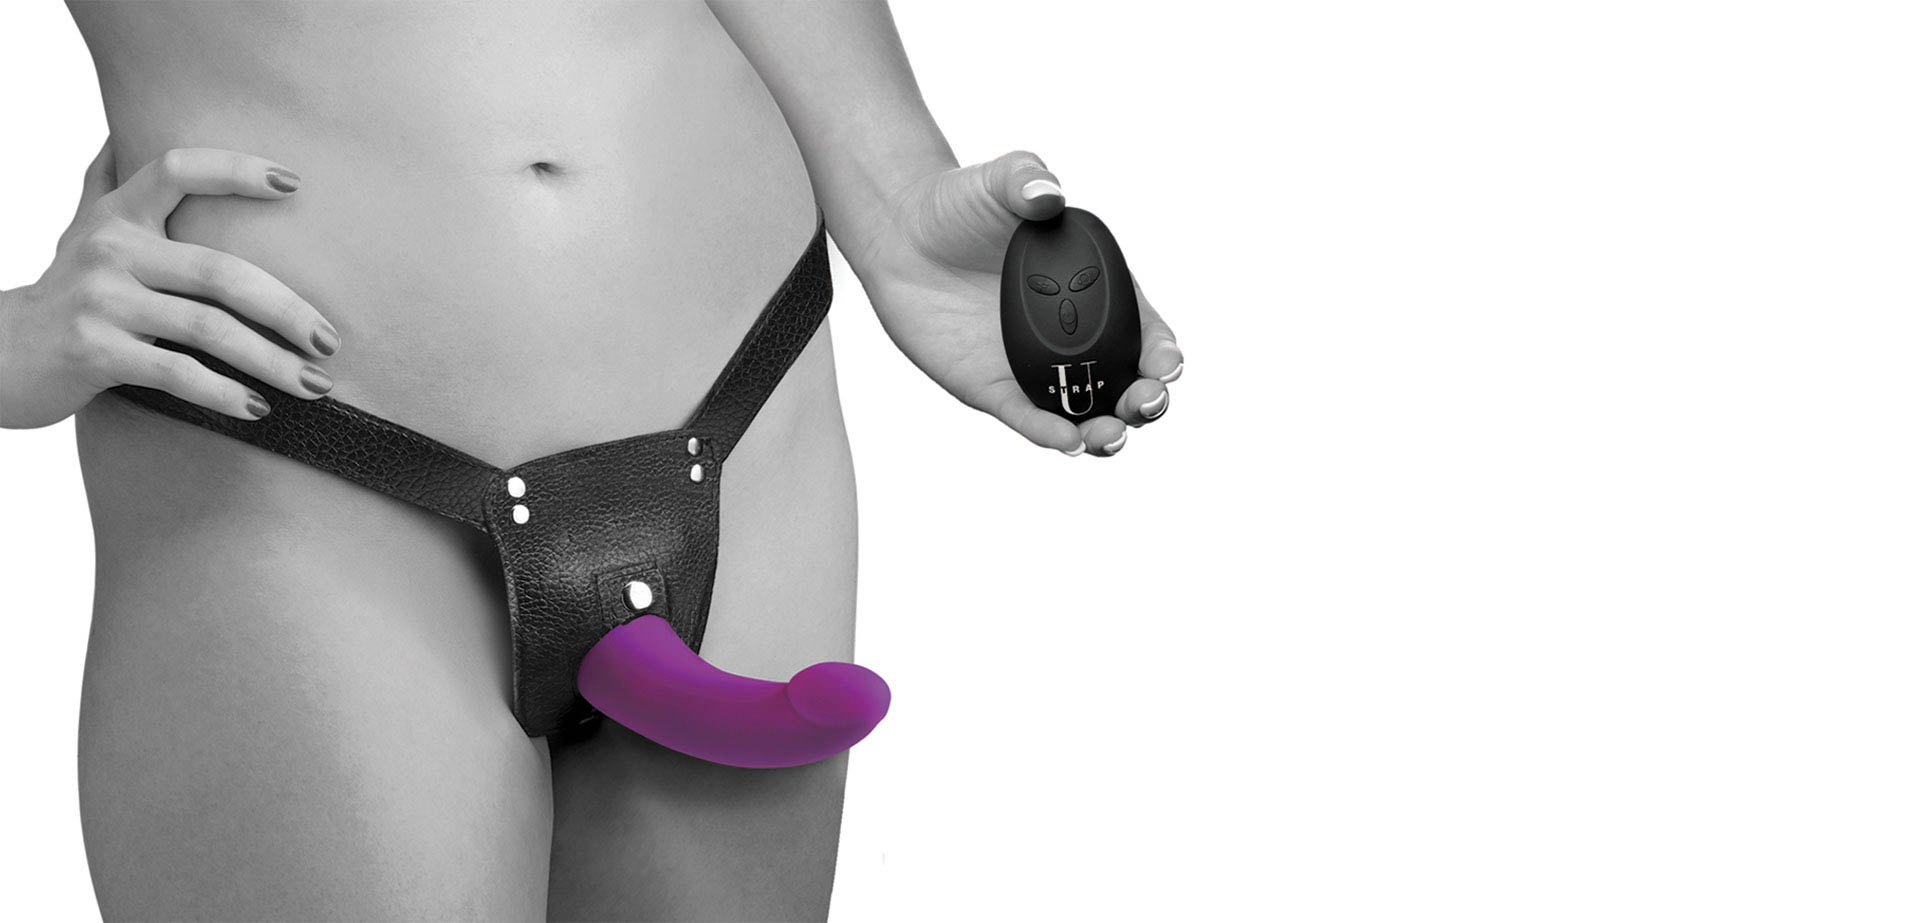 Remote control Double Penetration Vibrating Strap On Harness.